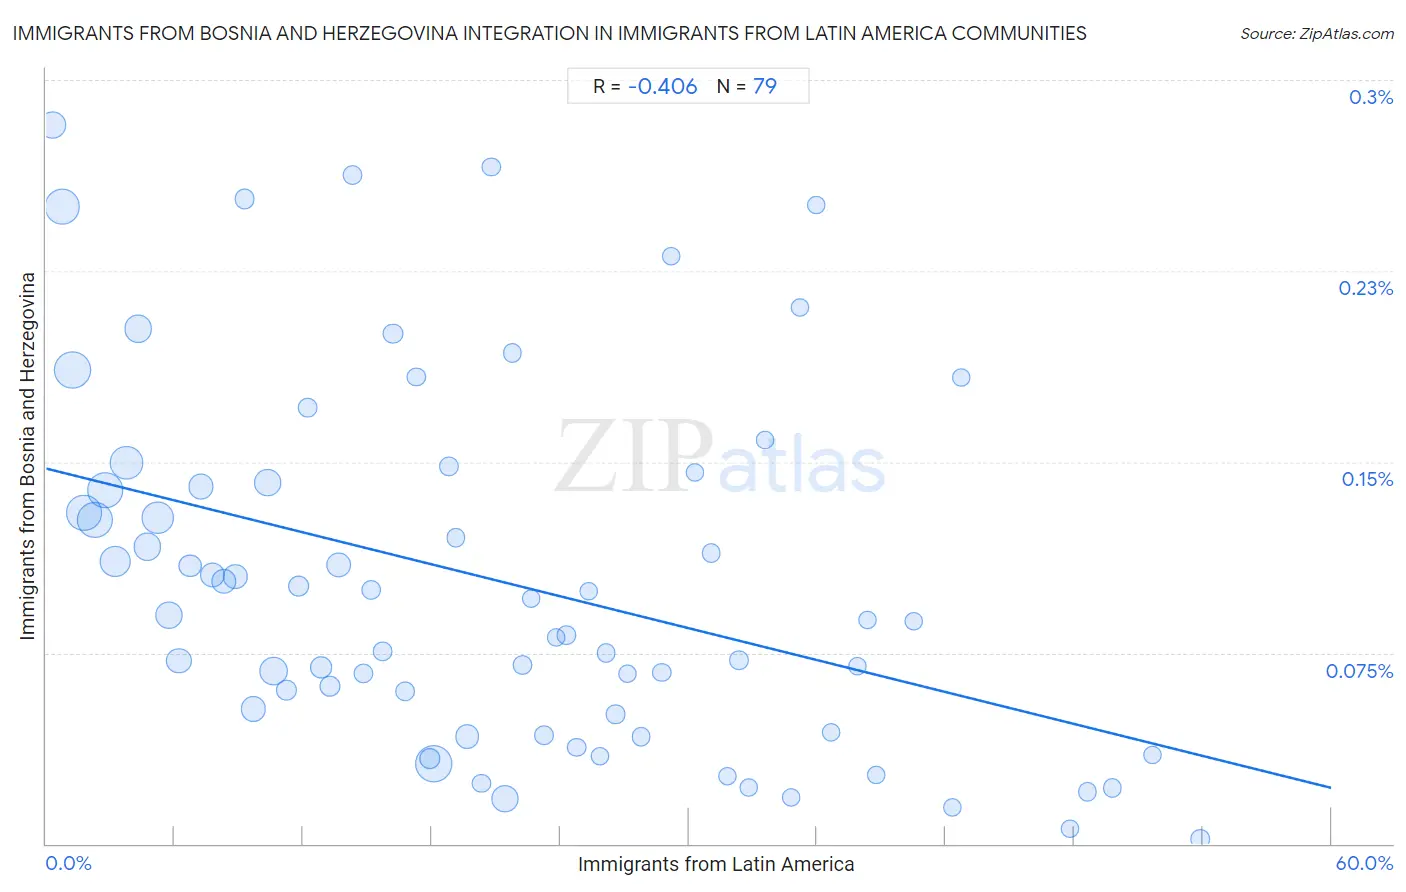 Immigrants from Latin America Integration in Immigrants from Bosnia and Herzegovina Communities